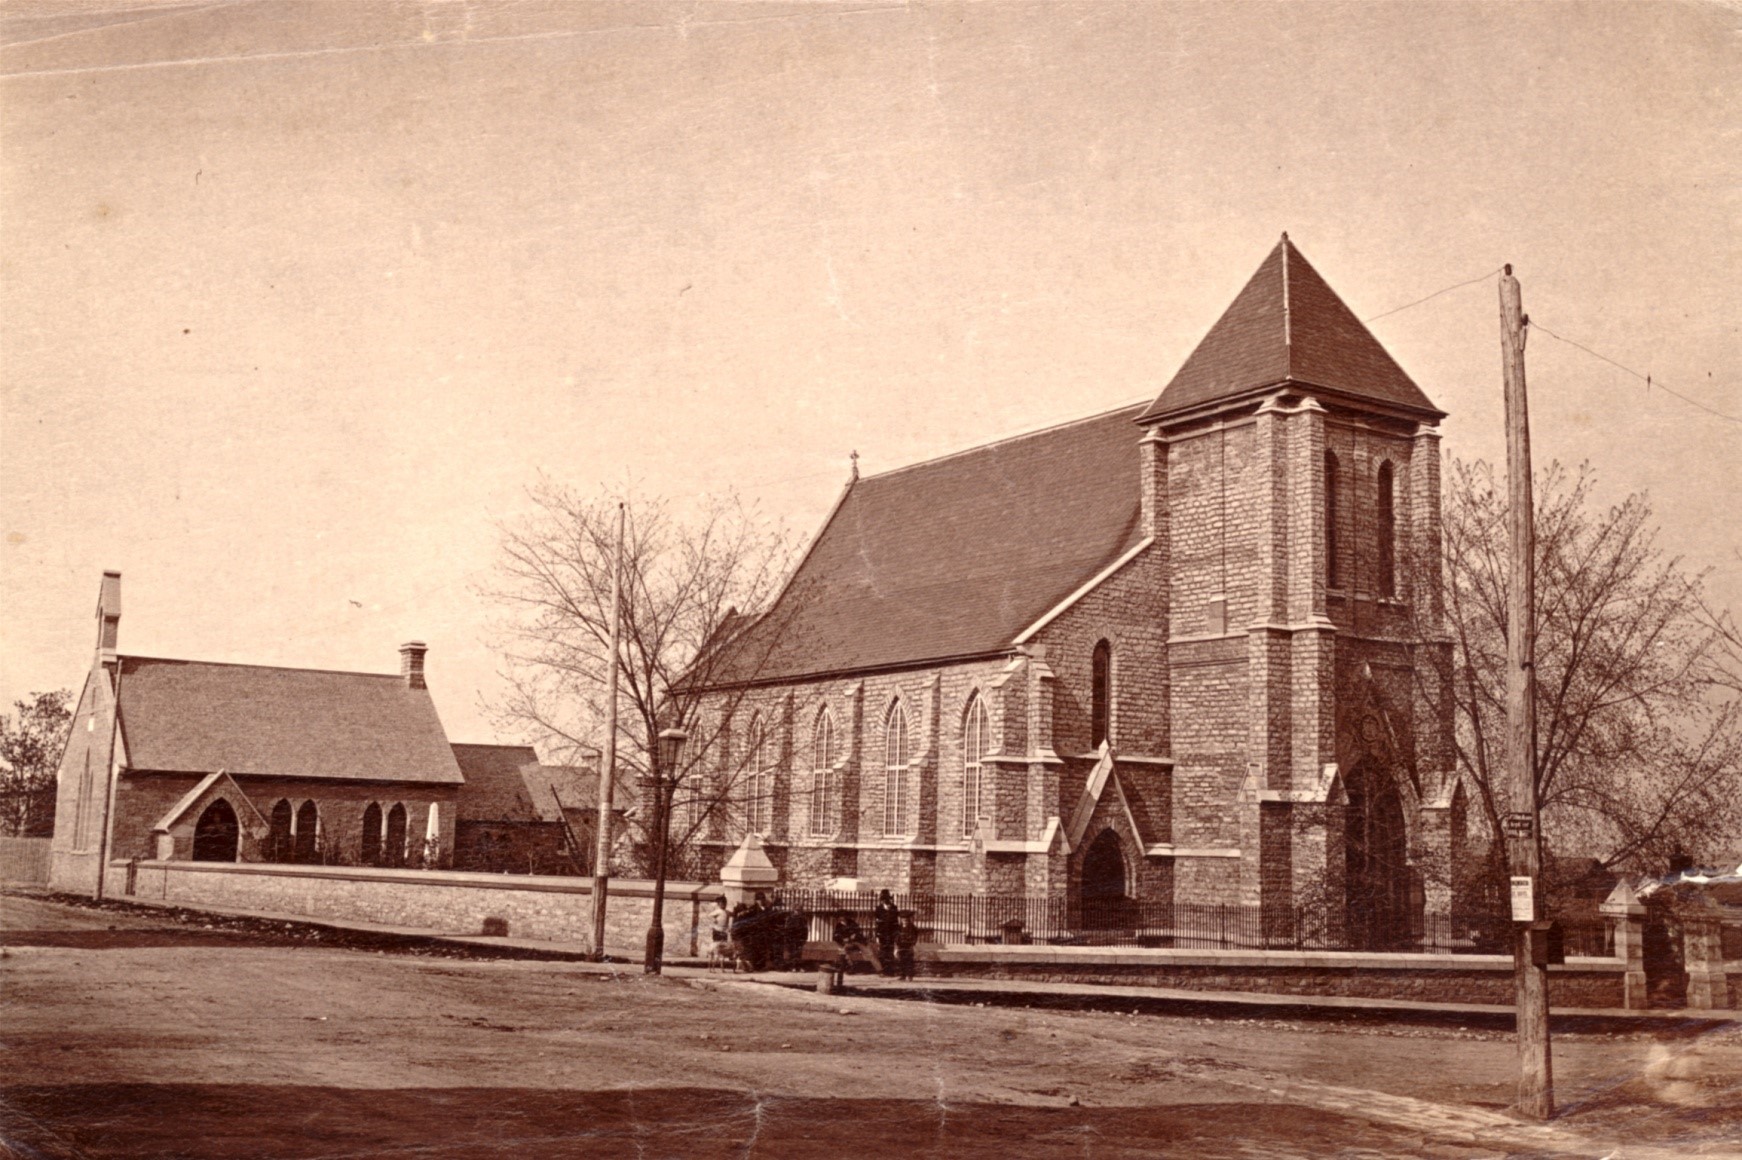 St. Paul's Church, 1870s, photo by RH Barrow (Collection J McKendry)